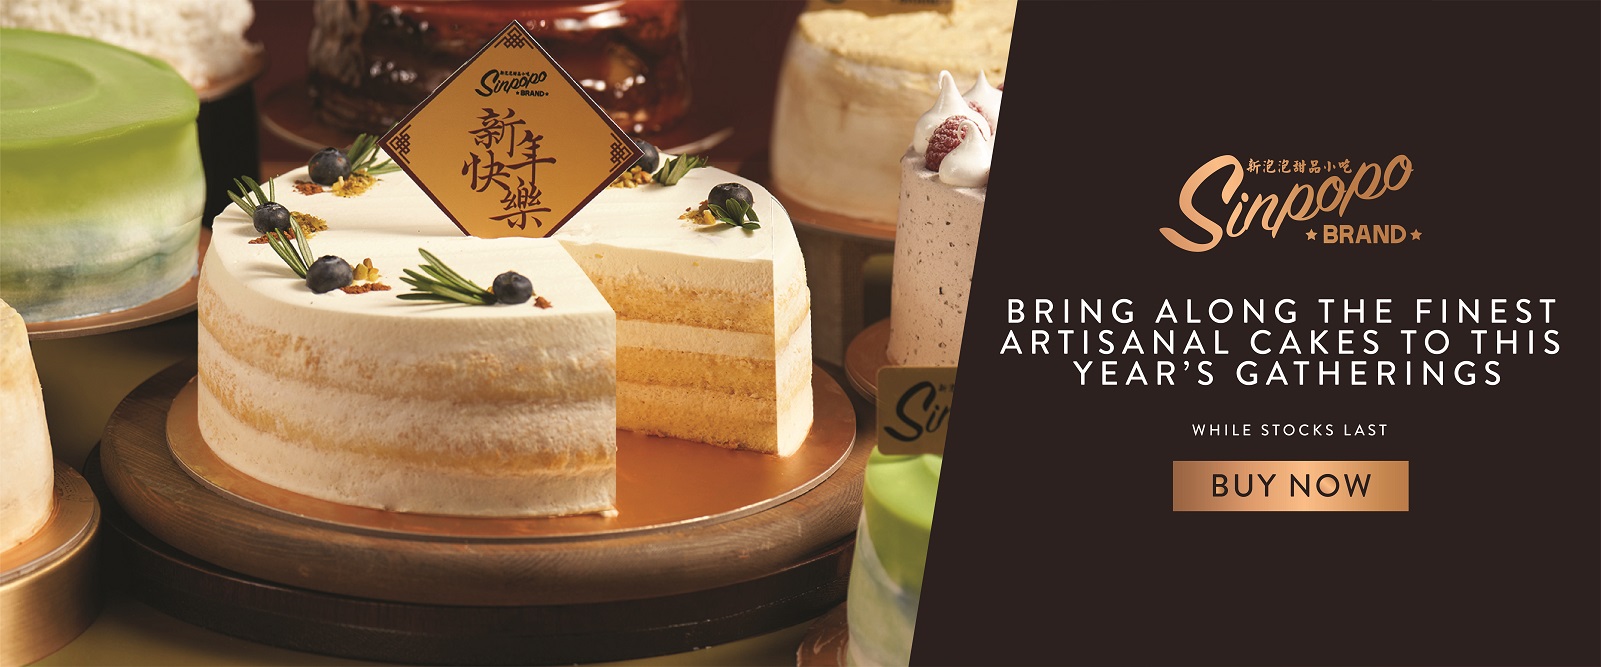 Website-Banner-CNY-Cakes